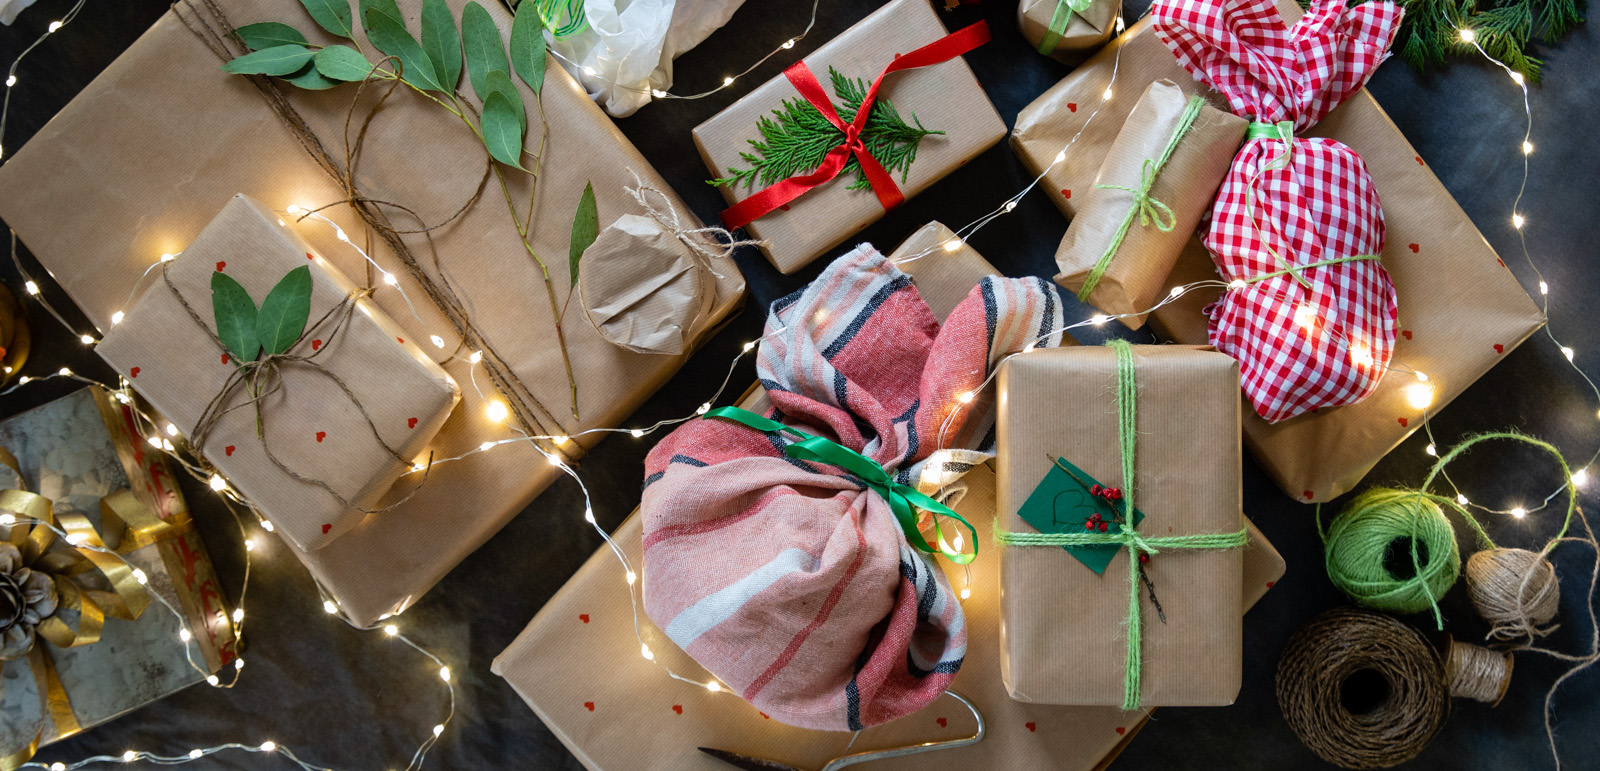 An overhead view of wrapped Christmas presents on a backdrop which have been decorated with ribbon, string, eucalyptus leaves and holly leaves. They are ready to be given at Christmas time and they are on the table, draped in Christmas lights.